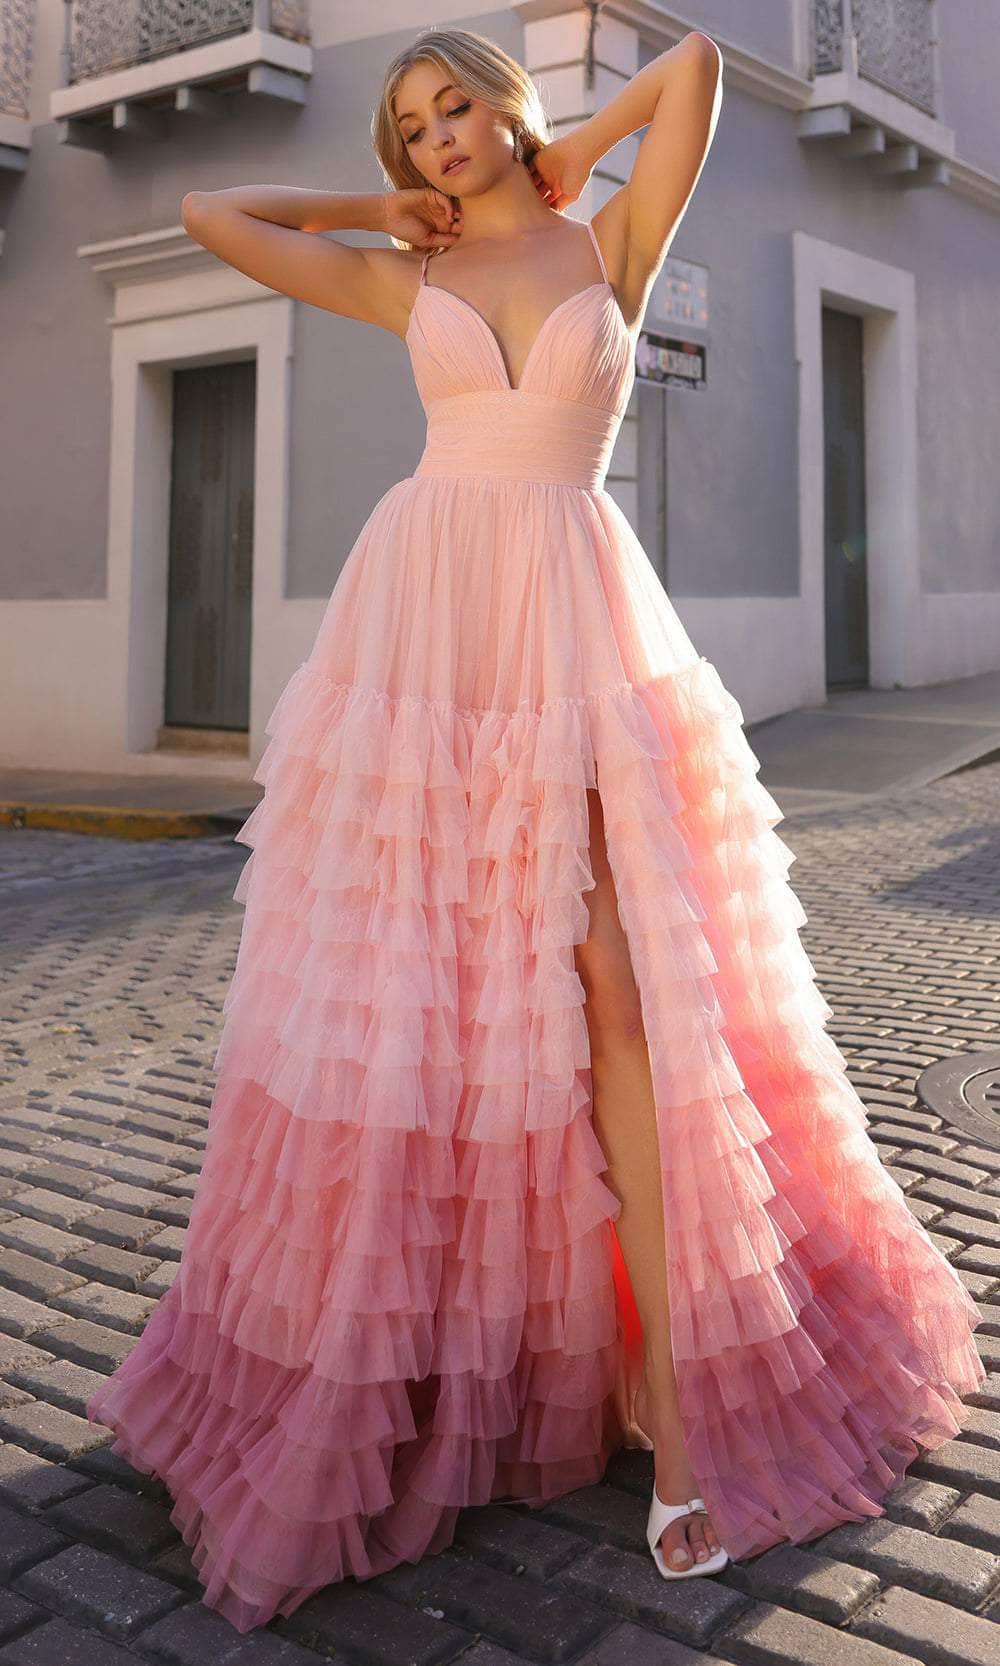 Nox Anabel C1420 - Ombre Ruffled Prom Dress Special Occasion Dresses 